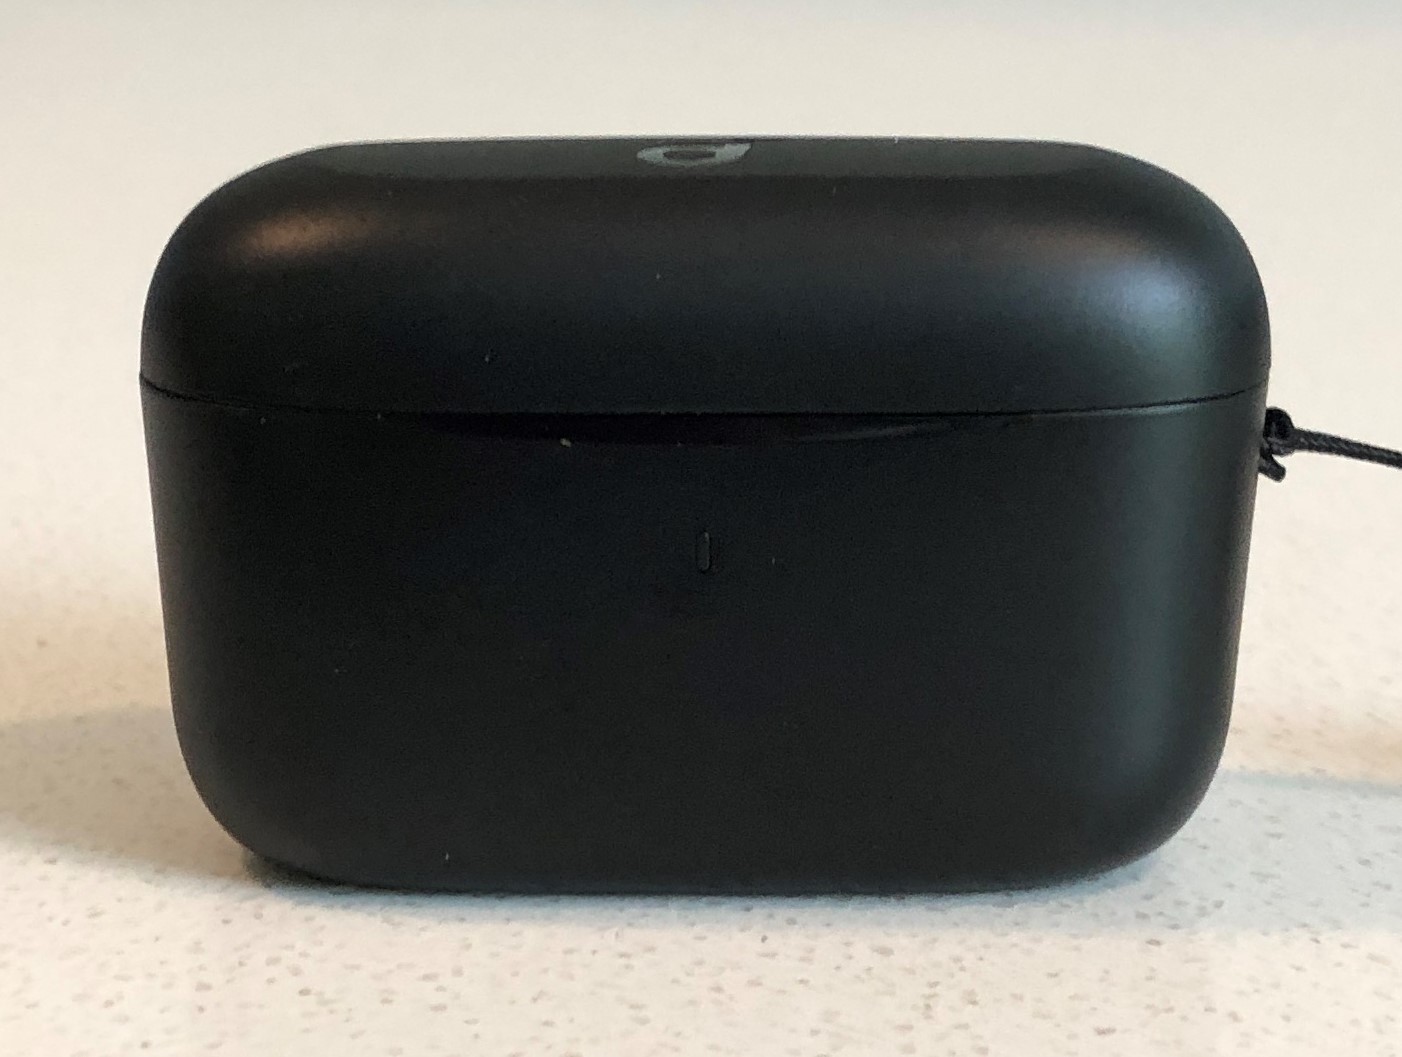 Soundcore A20i charging and carrying case side view